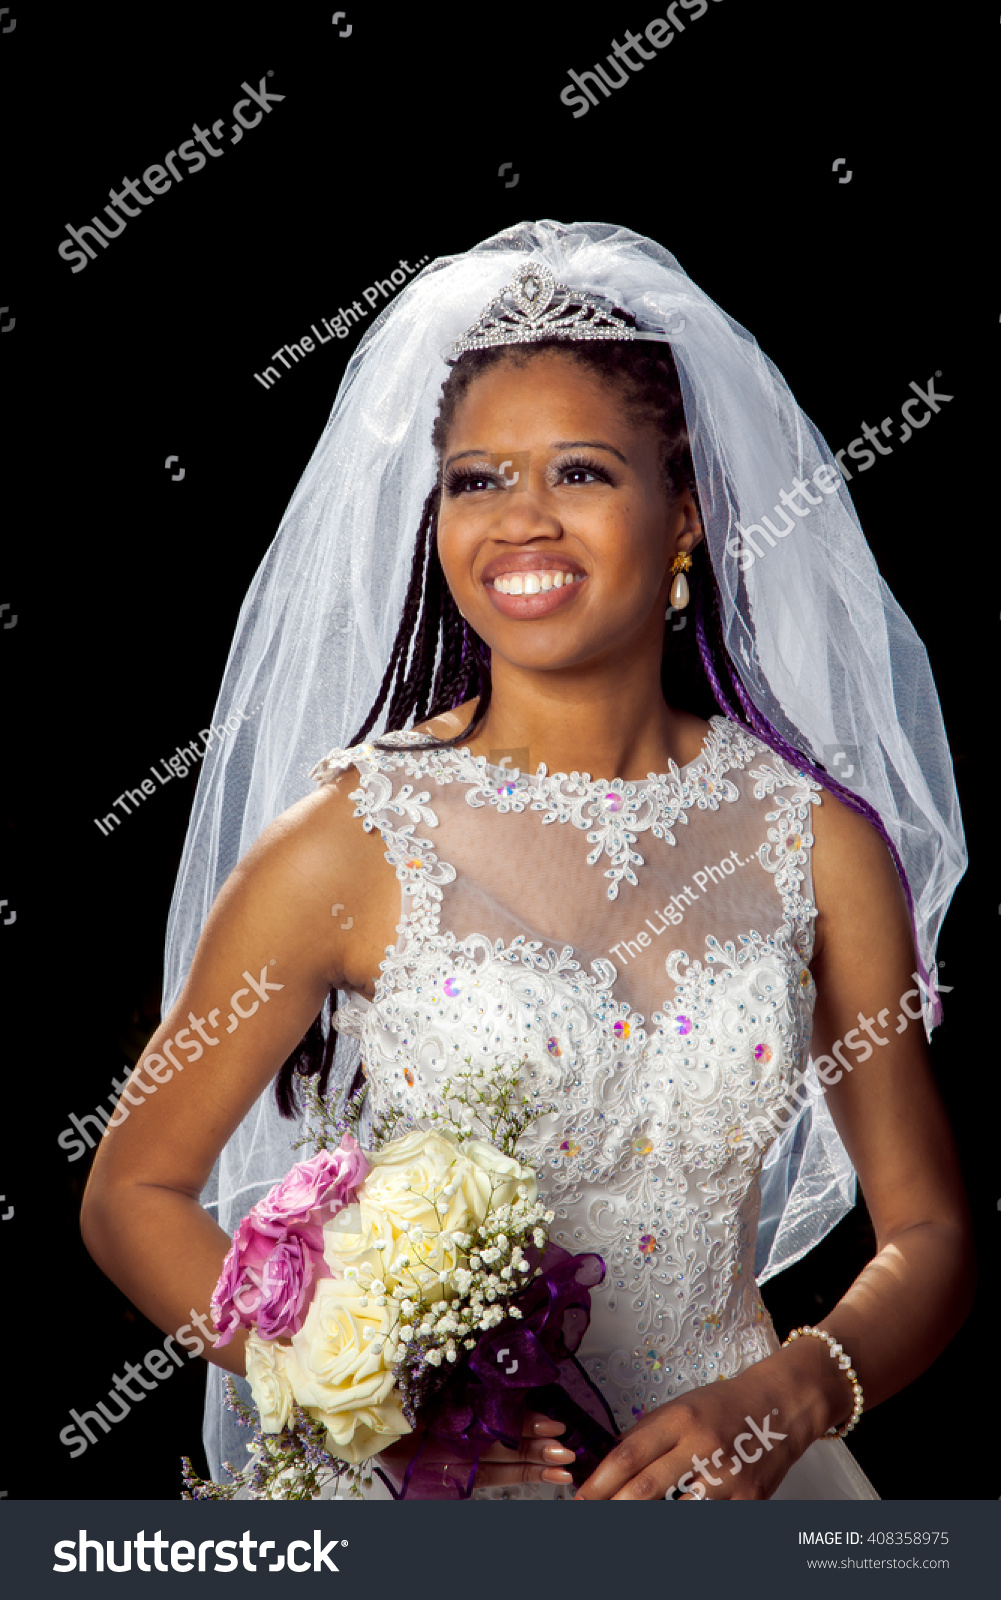 https://image.shutterstock.com/z/stock-photo-portrait-of-a-beautiful-african-american-bride-on-her-wedding-day-black-background-with-a-back-408358975.jpg